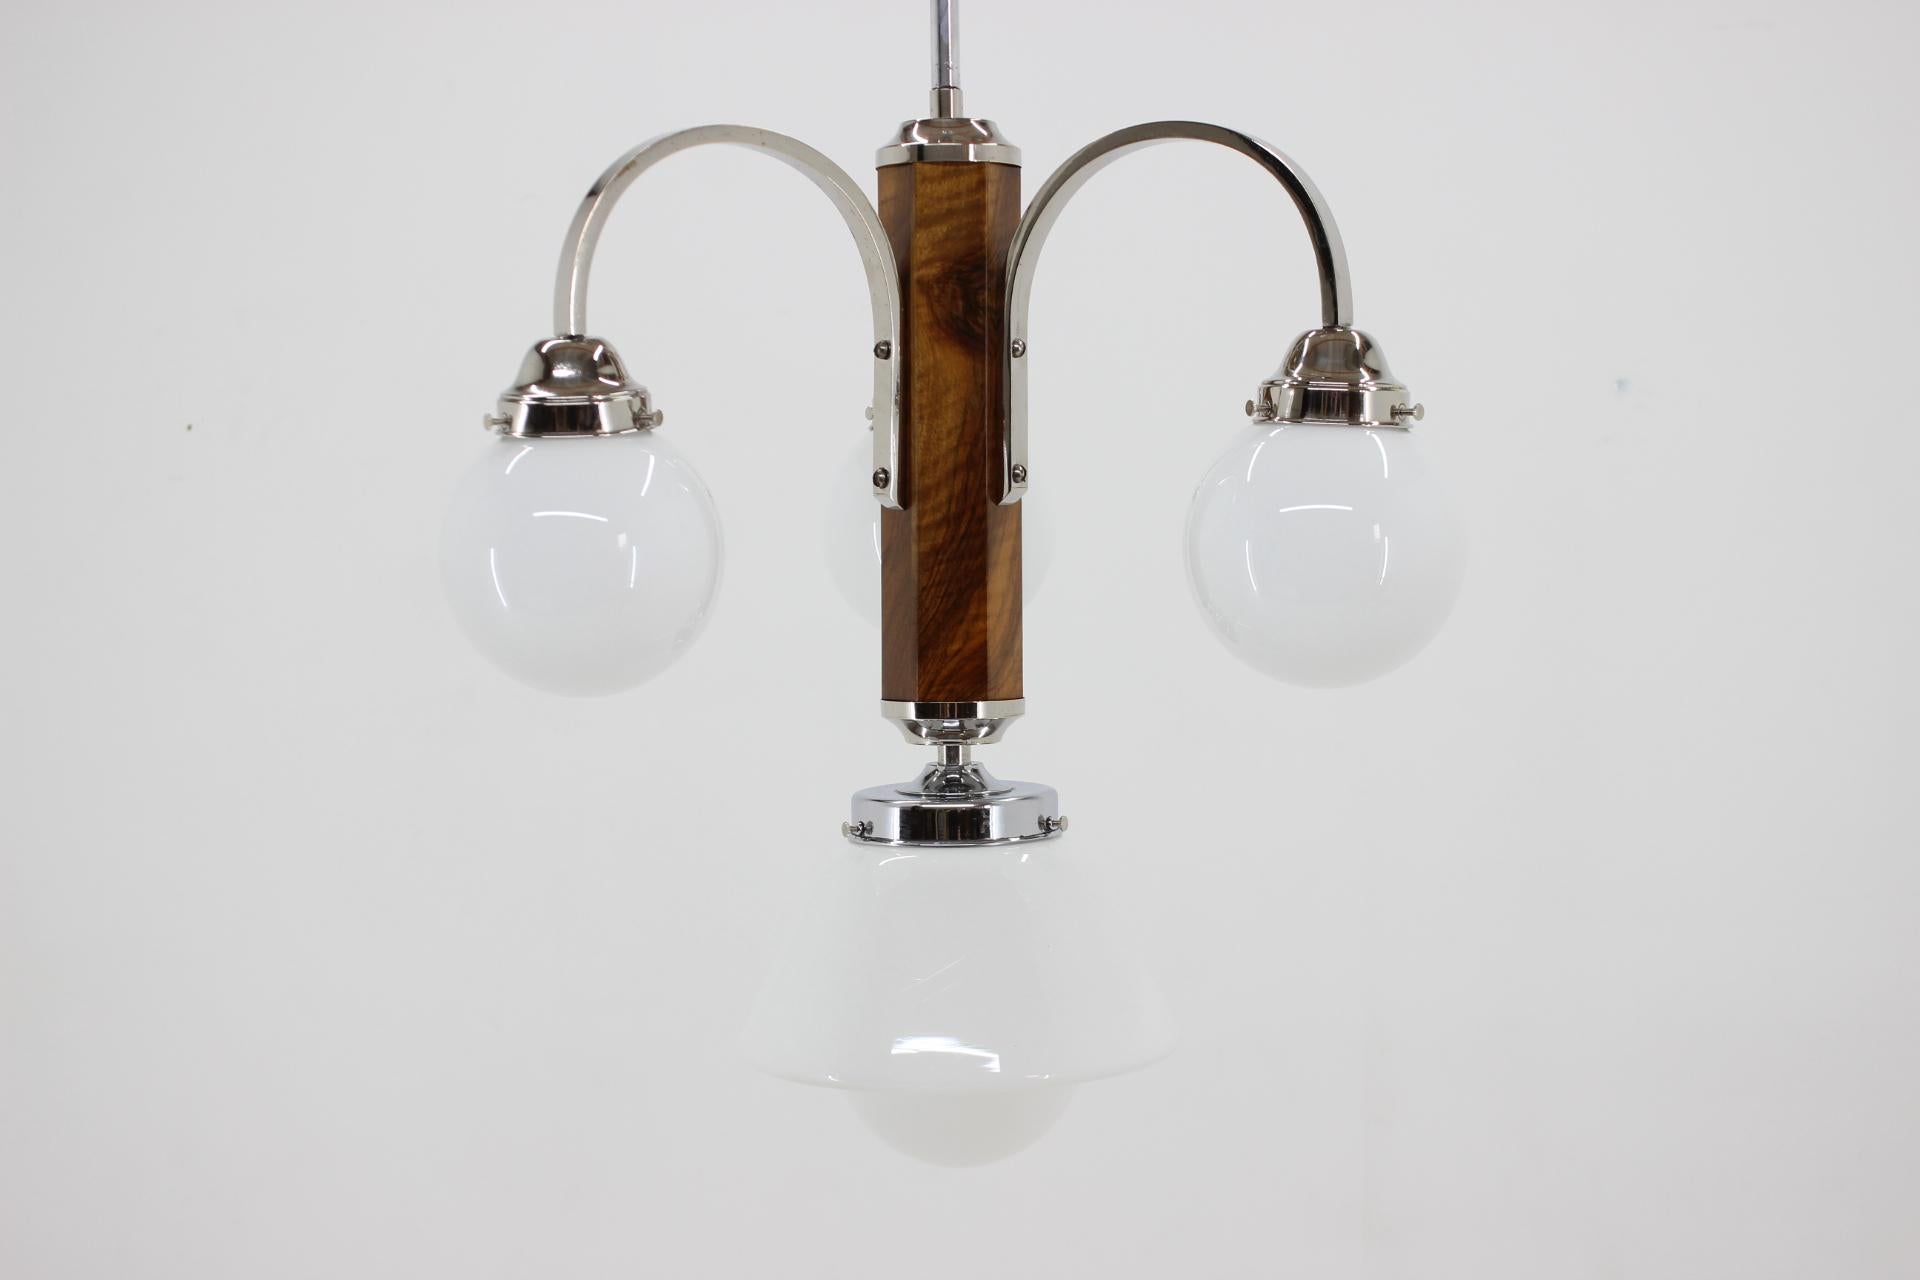 Completely restored Art Deco chandelier. 
Walnut with new shellac finish. 
Chrome with minor patina polished. 
Rewired: two separate circuits - 3+1x40W, E25-E27 bulbs. 
US wiring compatible.